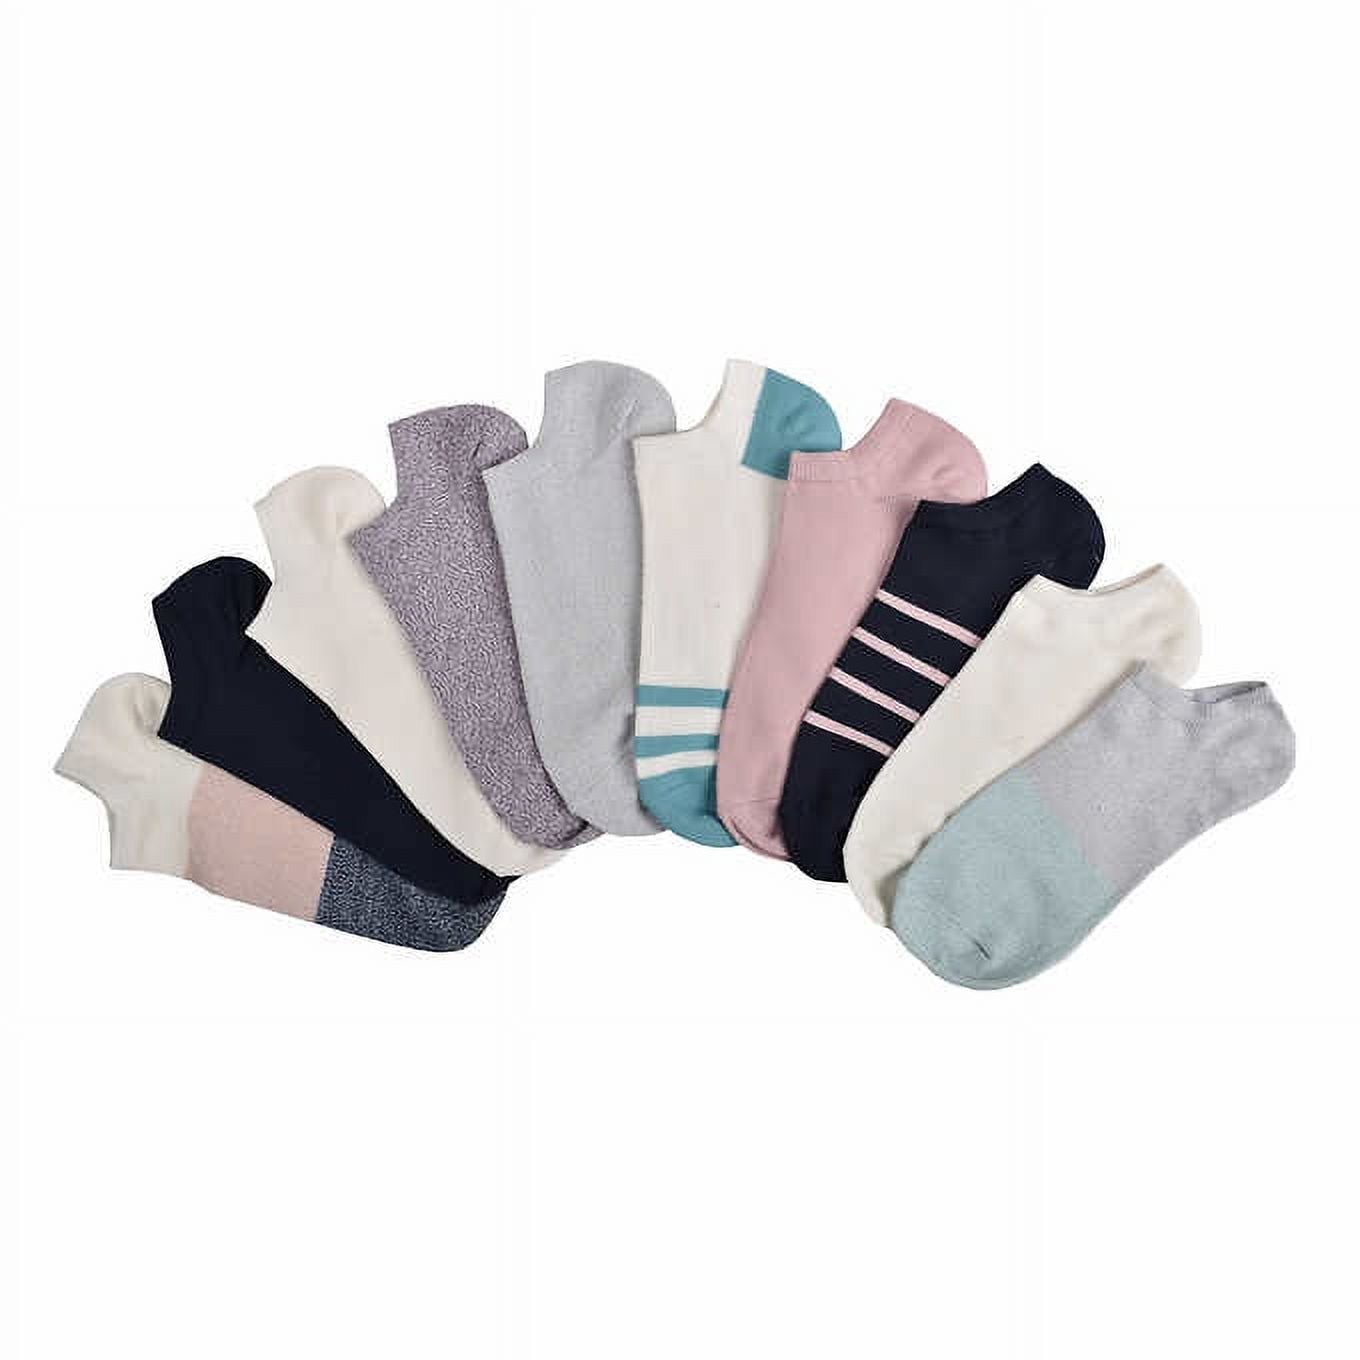 luckybrand ladies socks are on sale! 👏🏼 I really love the colors, and  they're really comfy! Get 6 pairs for just $6.99 through 1